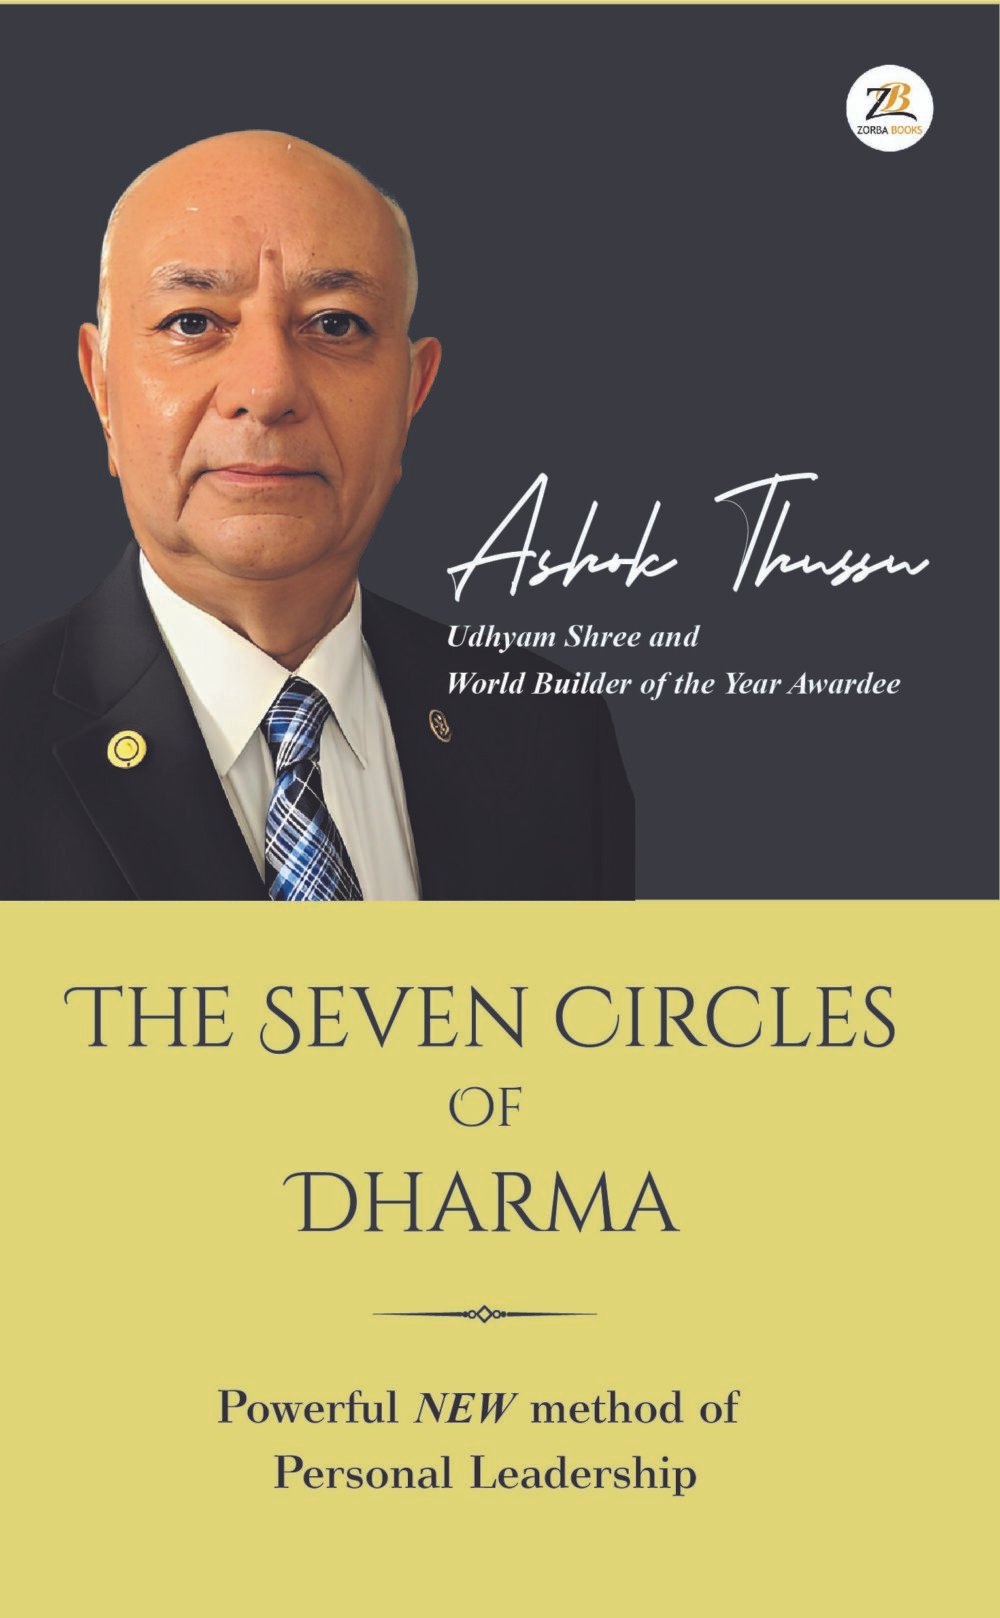 The Seven Circles of Dharma